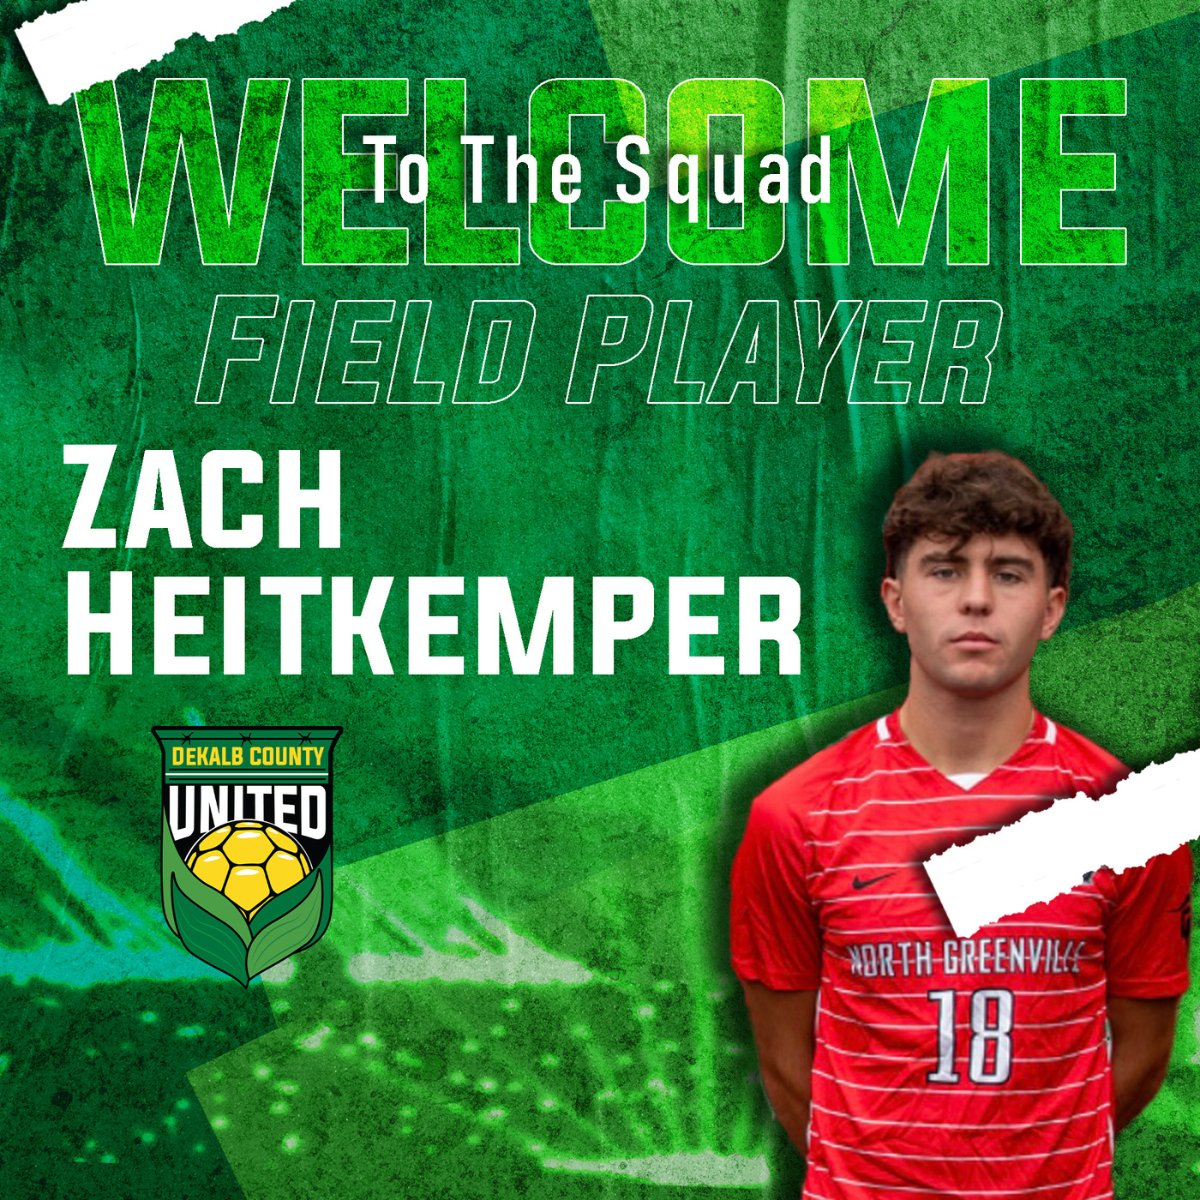 Cheer loud for Zach 'Z' Heitkemper, the dynamo of DKCU Dream Team! 💥⚽ onlrl.co/acheitkemper The Huntley native joins us from D2 North Greenville. Let's show him some love! 💖⚽ #TeamZ @ZachHeitkemper6 #dekalbil #dekalbillinois #sycamoreil #sycamoreillinois 💚💛🌽⚽️